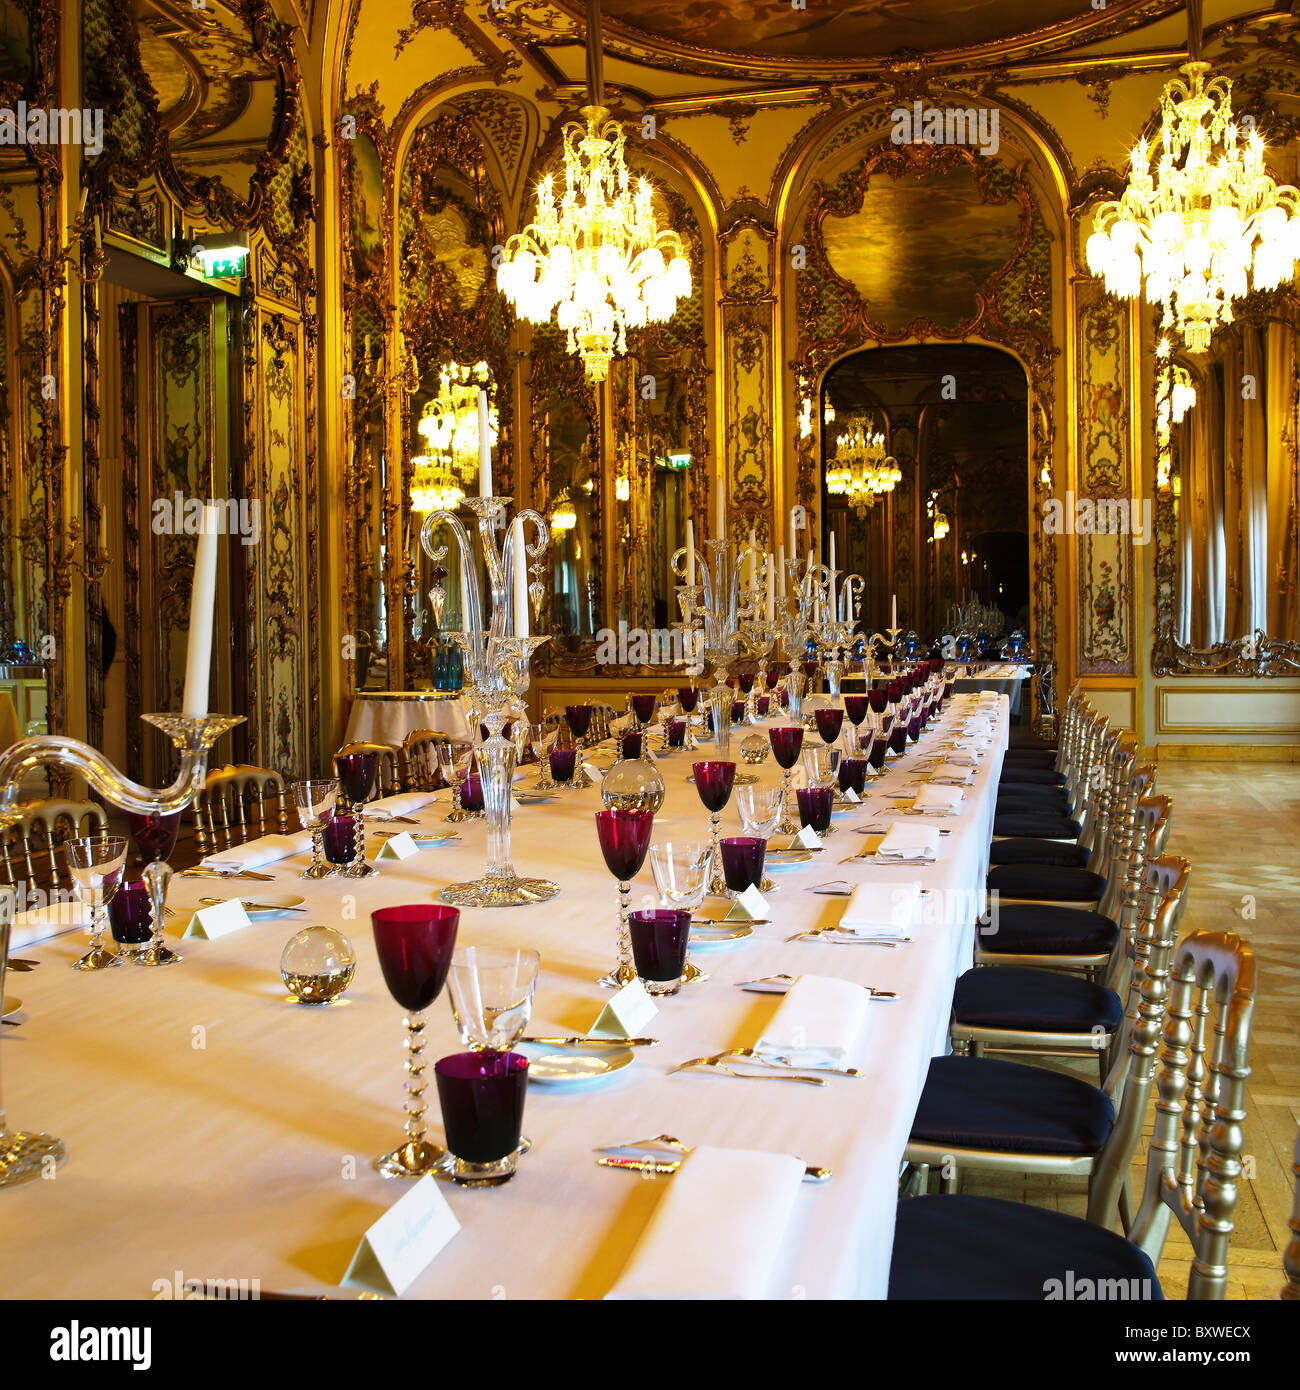 Maison Baccarat Paris The Ball Room Laid For a Banquet Stock Photo - Alamy